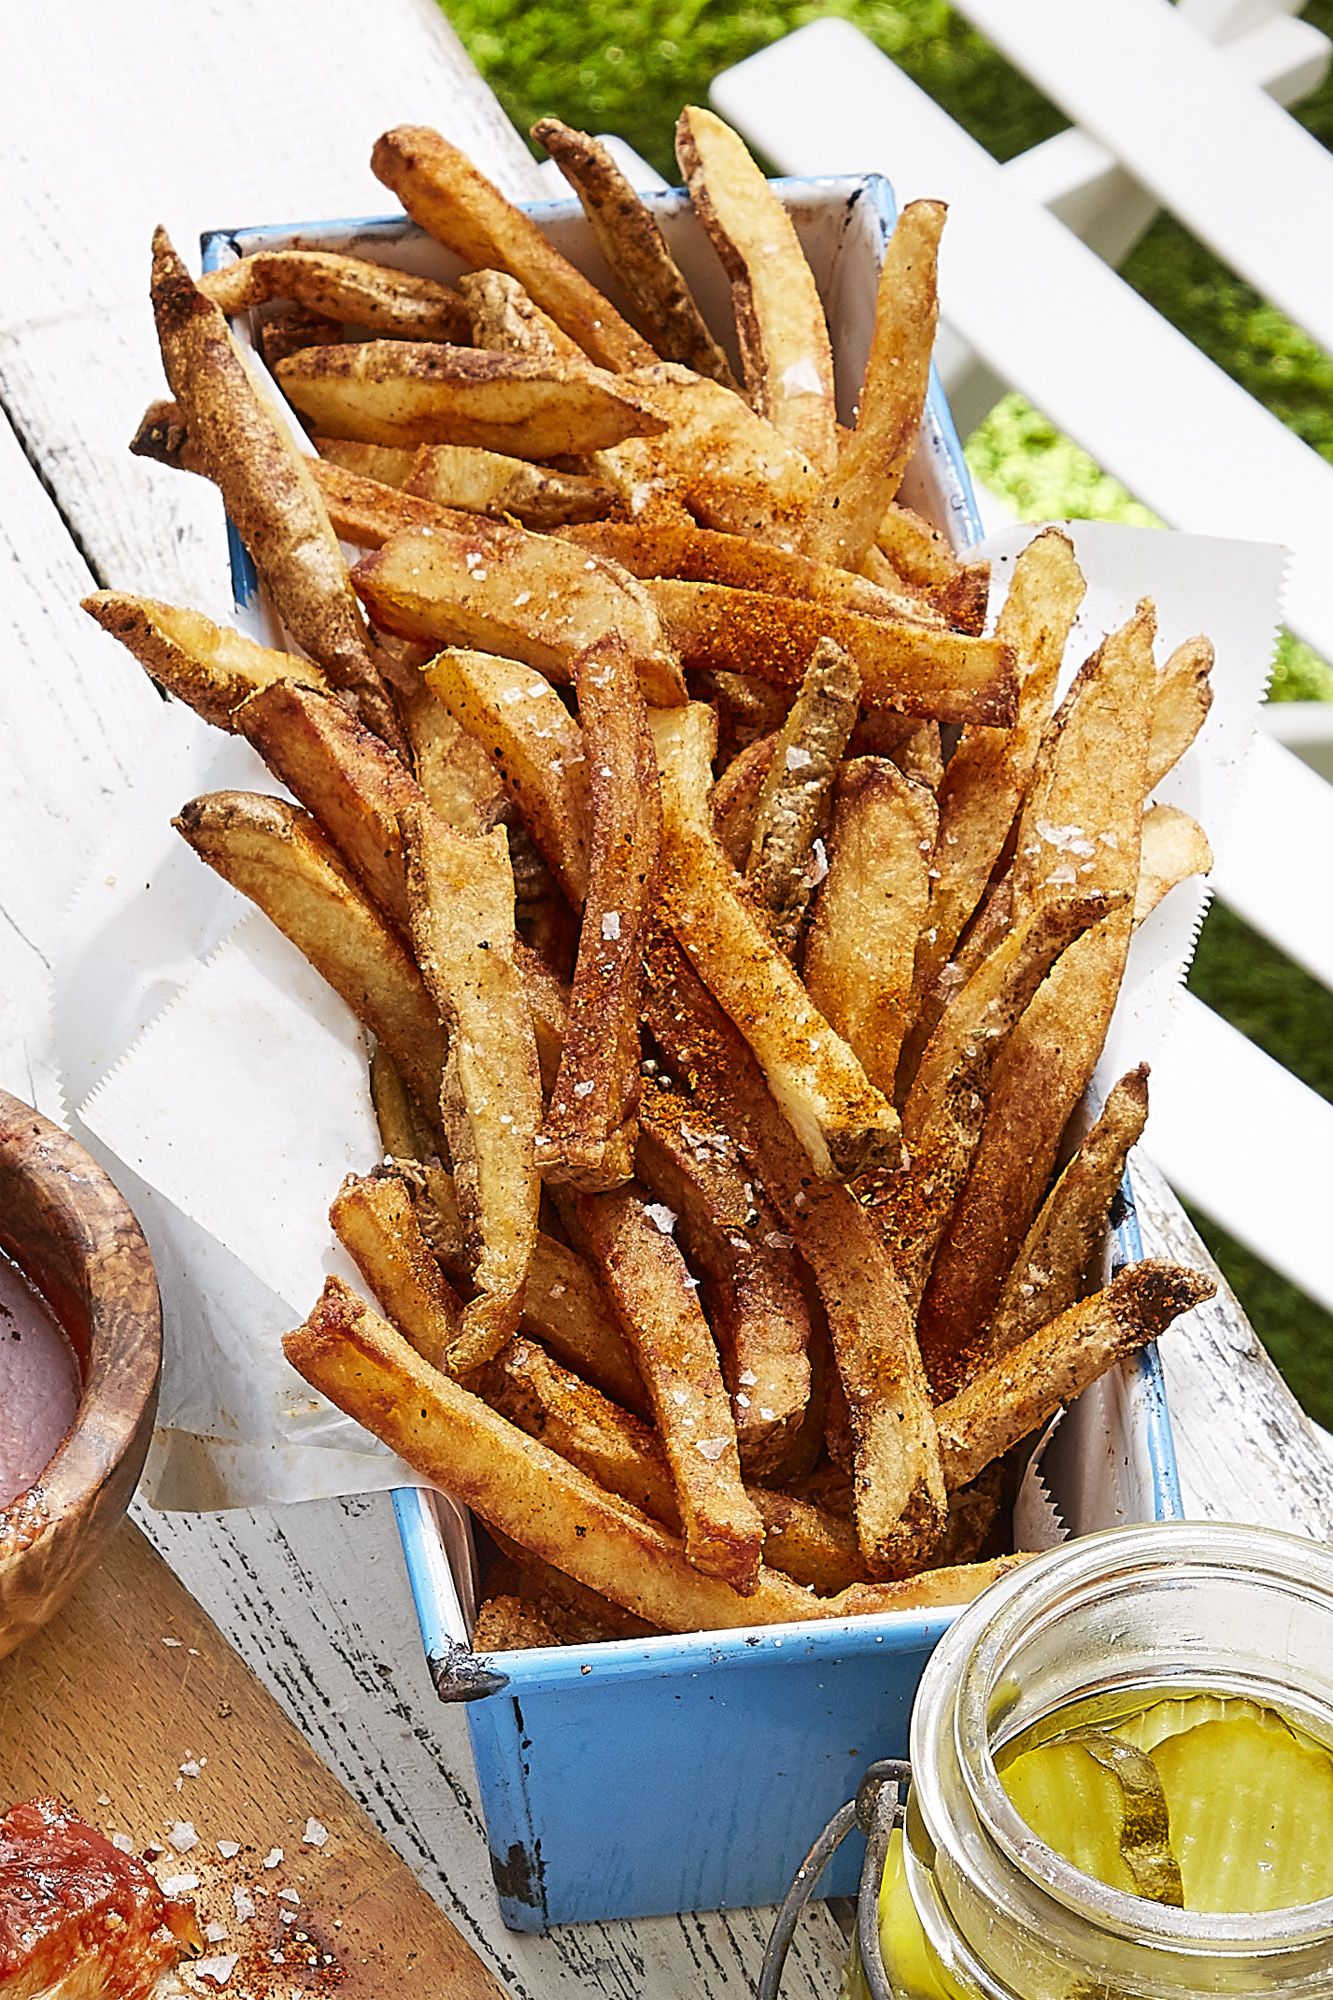 Best Old Bay French Fries Recipe - How to Make Old Bay French Fries